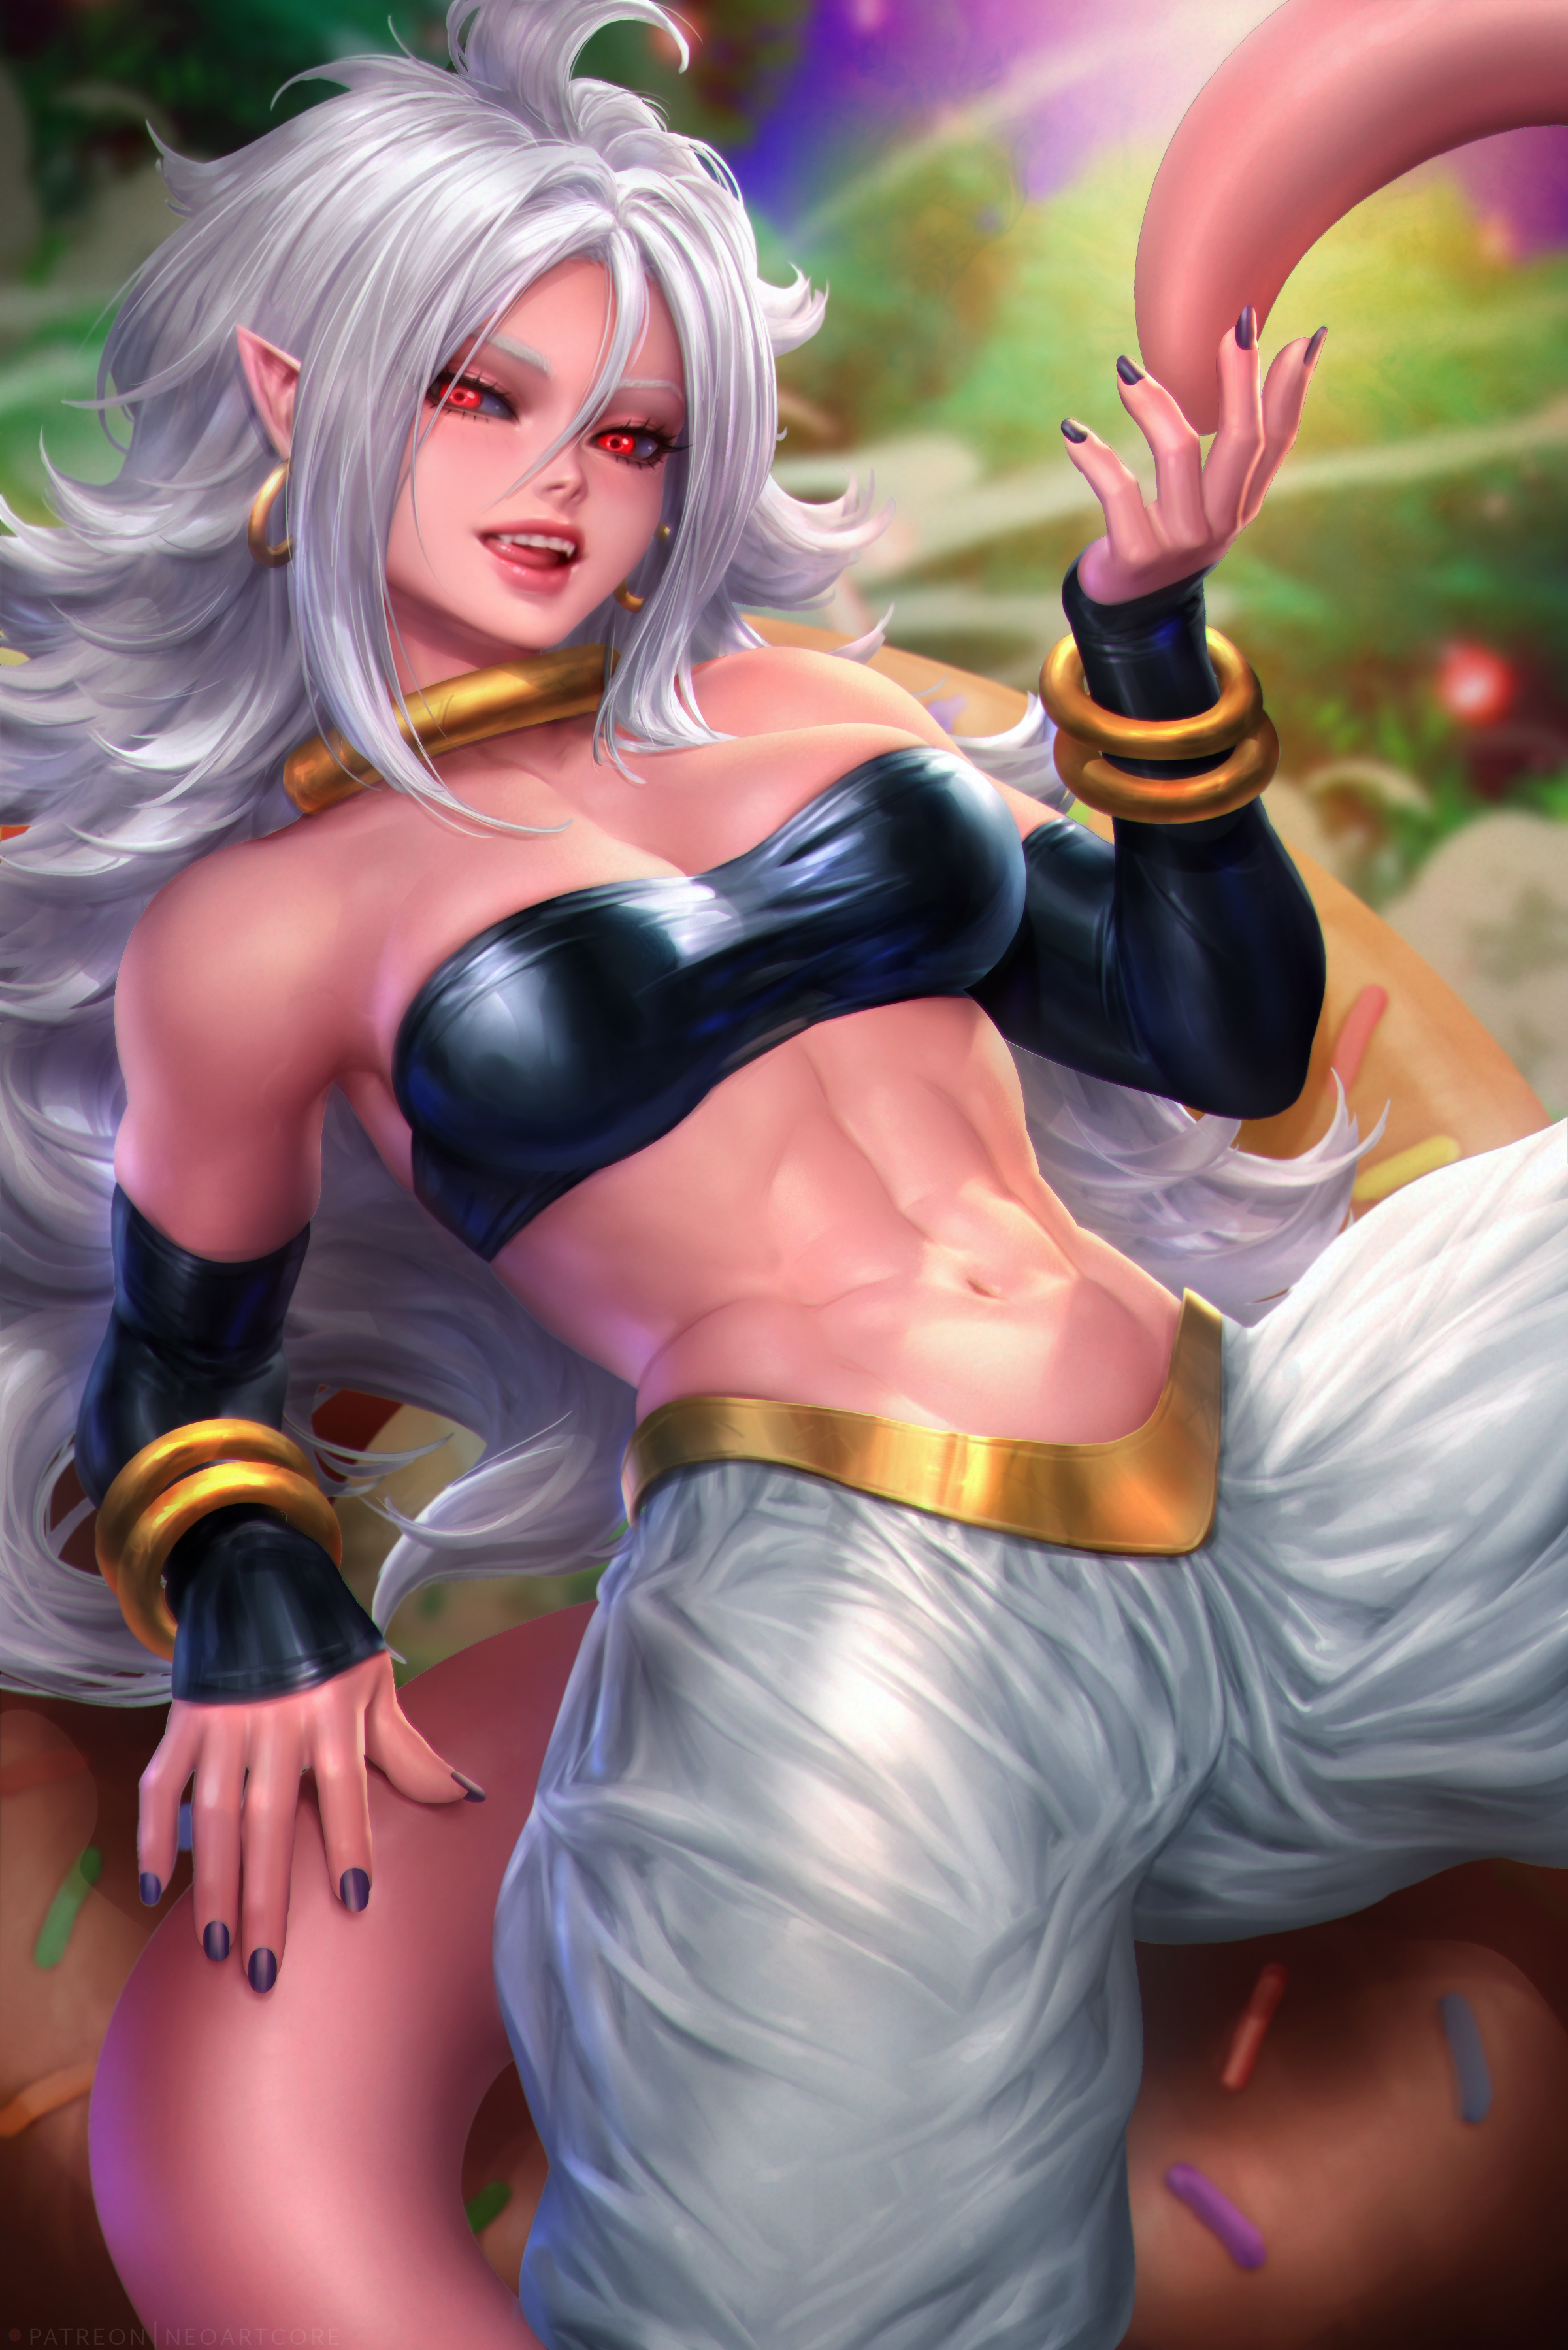 Anime 2400x3597 Android 21 Dragon Ball FighterZ video games video game girls anime girls fantasy girl portrait display white hair long hair looking at viewer arm warmers bracelets black top bare shoulders short tops belly pants tail artwork drawing digital art illustration fan art NeoArtCorE (artist)